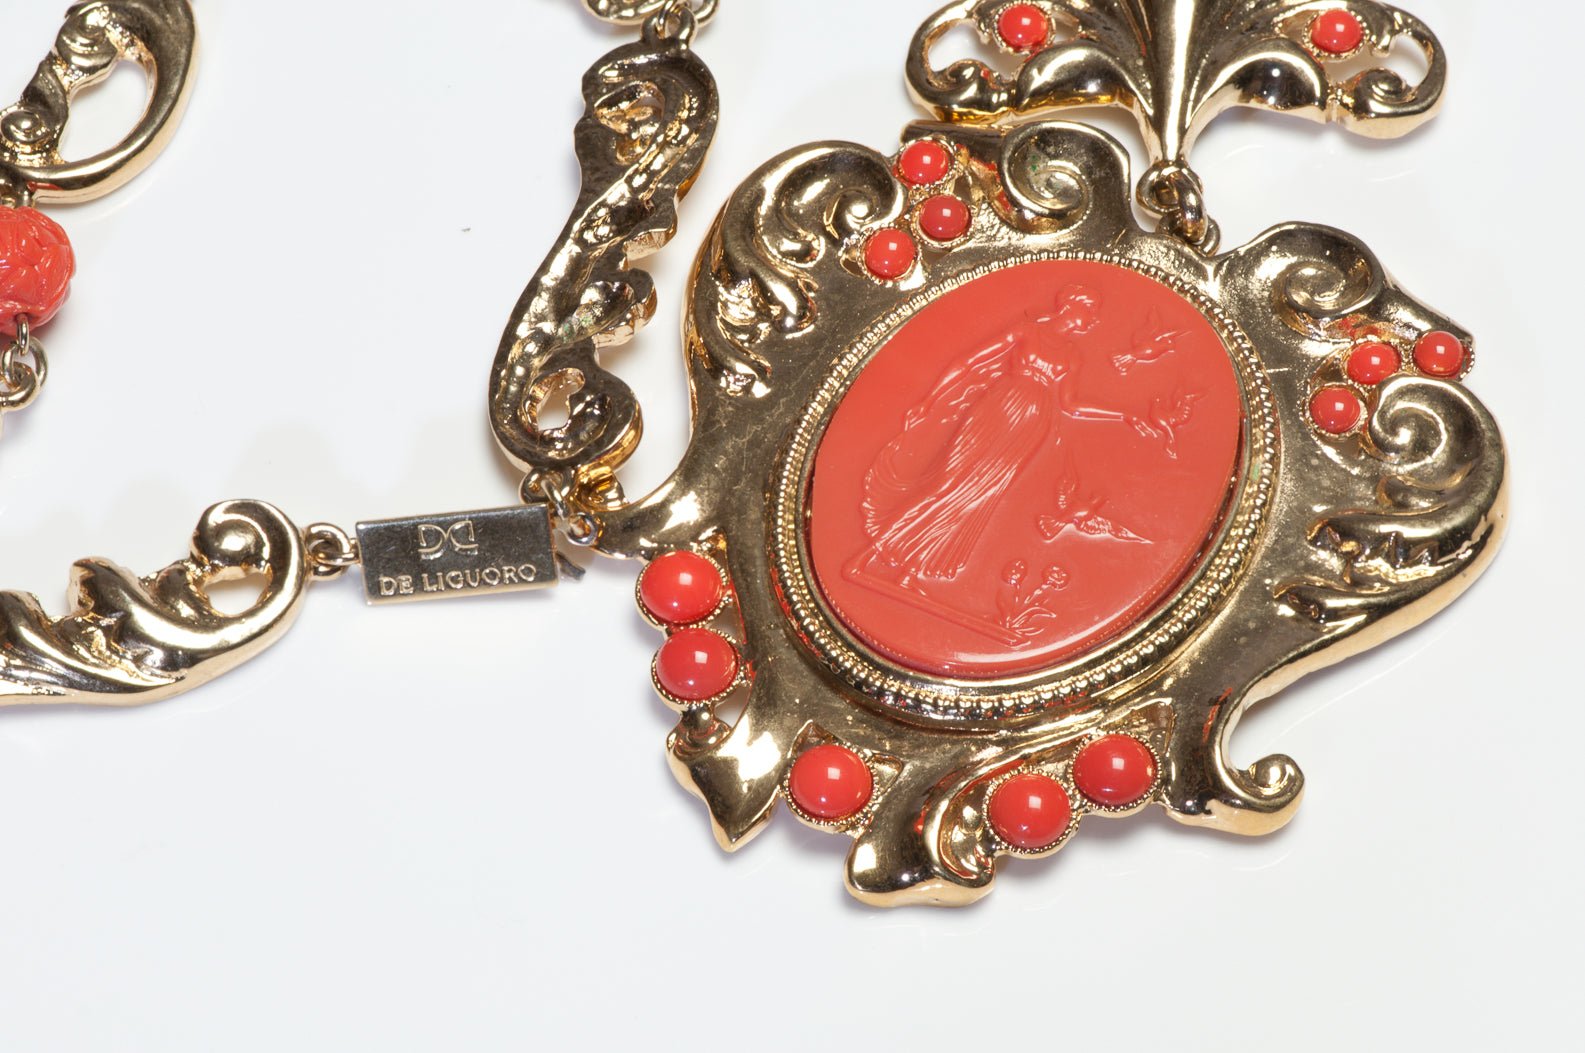 Gianni de Liguoro 1980’s Gold Plated Faux Carved Coral Cameo Pendant Necklace